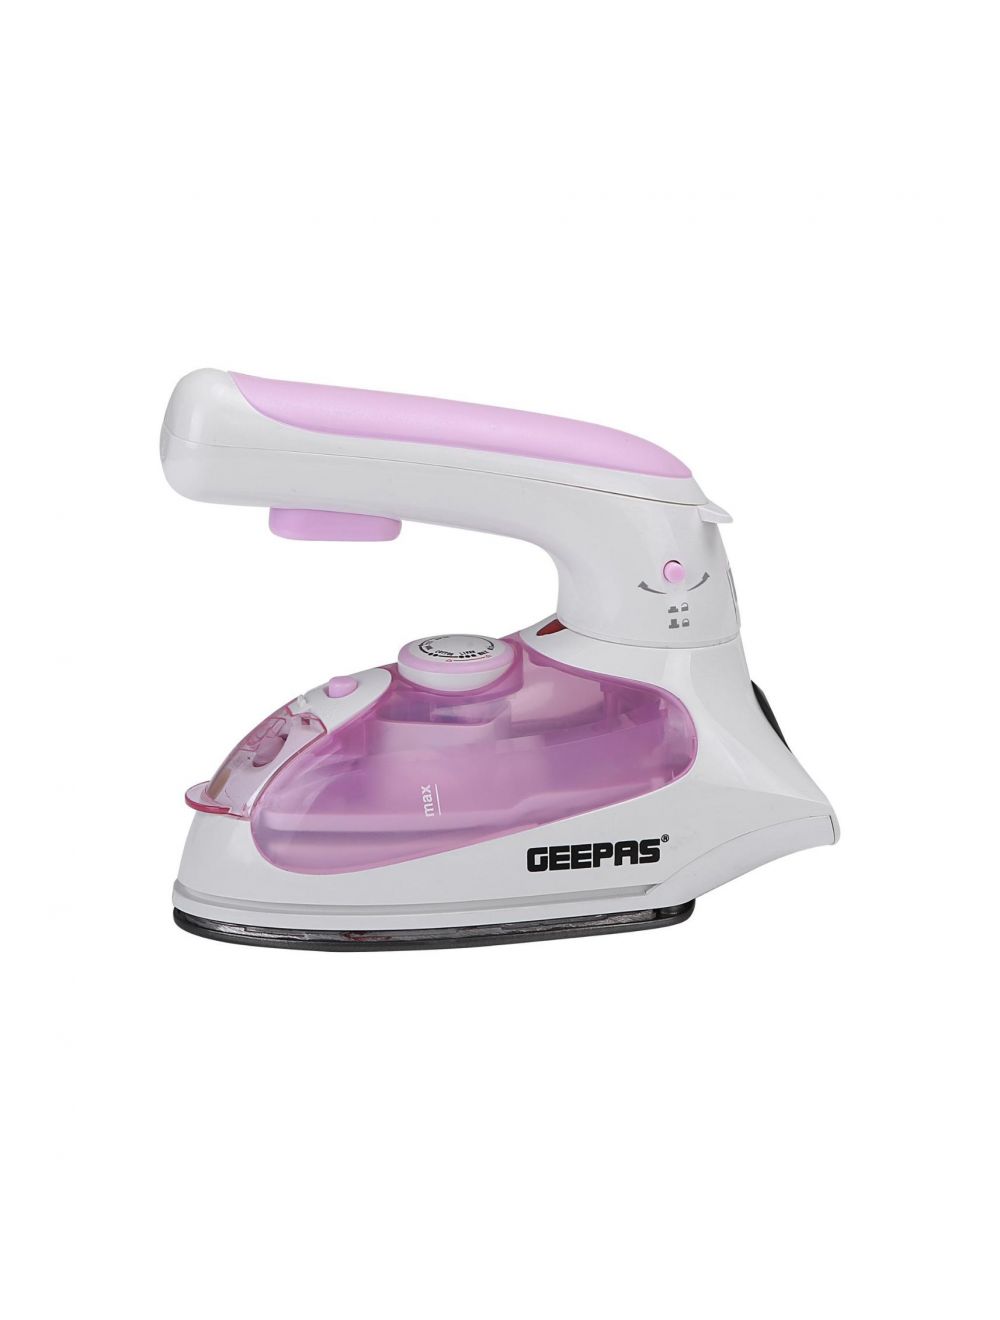 Geepas GSI7910 Travel Steam Iron/Ns Coating Plate